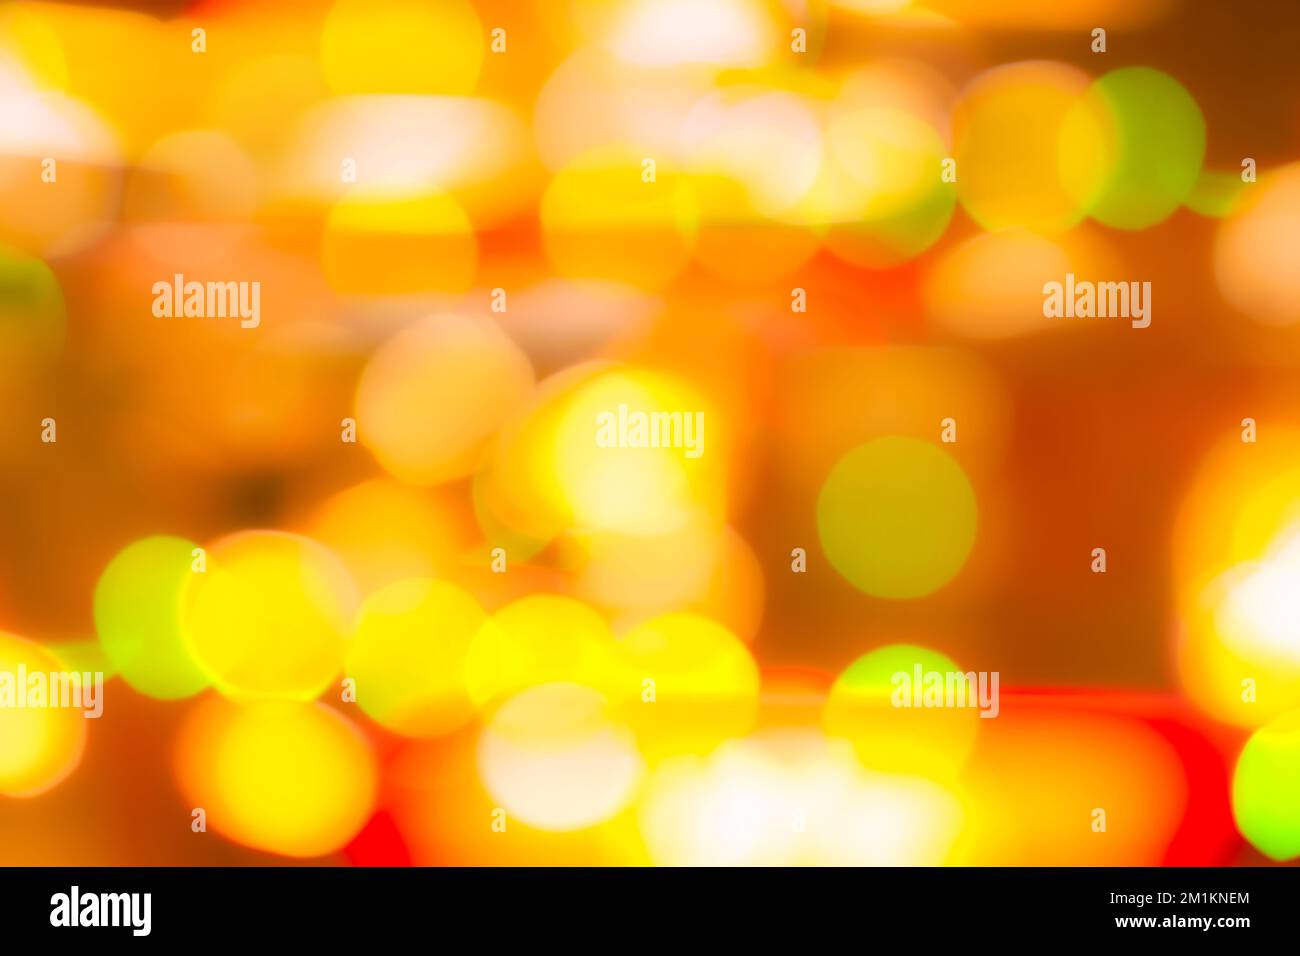 Blur gold, green, and red color bokeh background. Blur abstract background for Christmas day. Light with a beautiful pattern of round bokeh. Orange Stock Photo